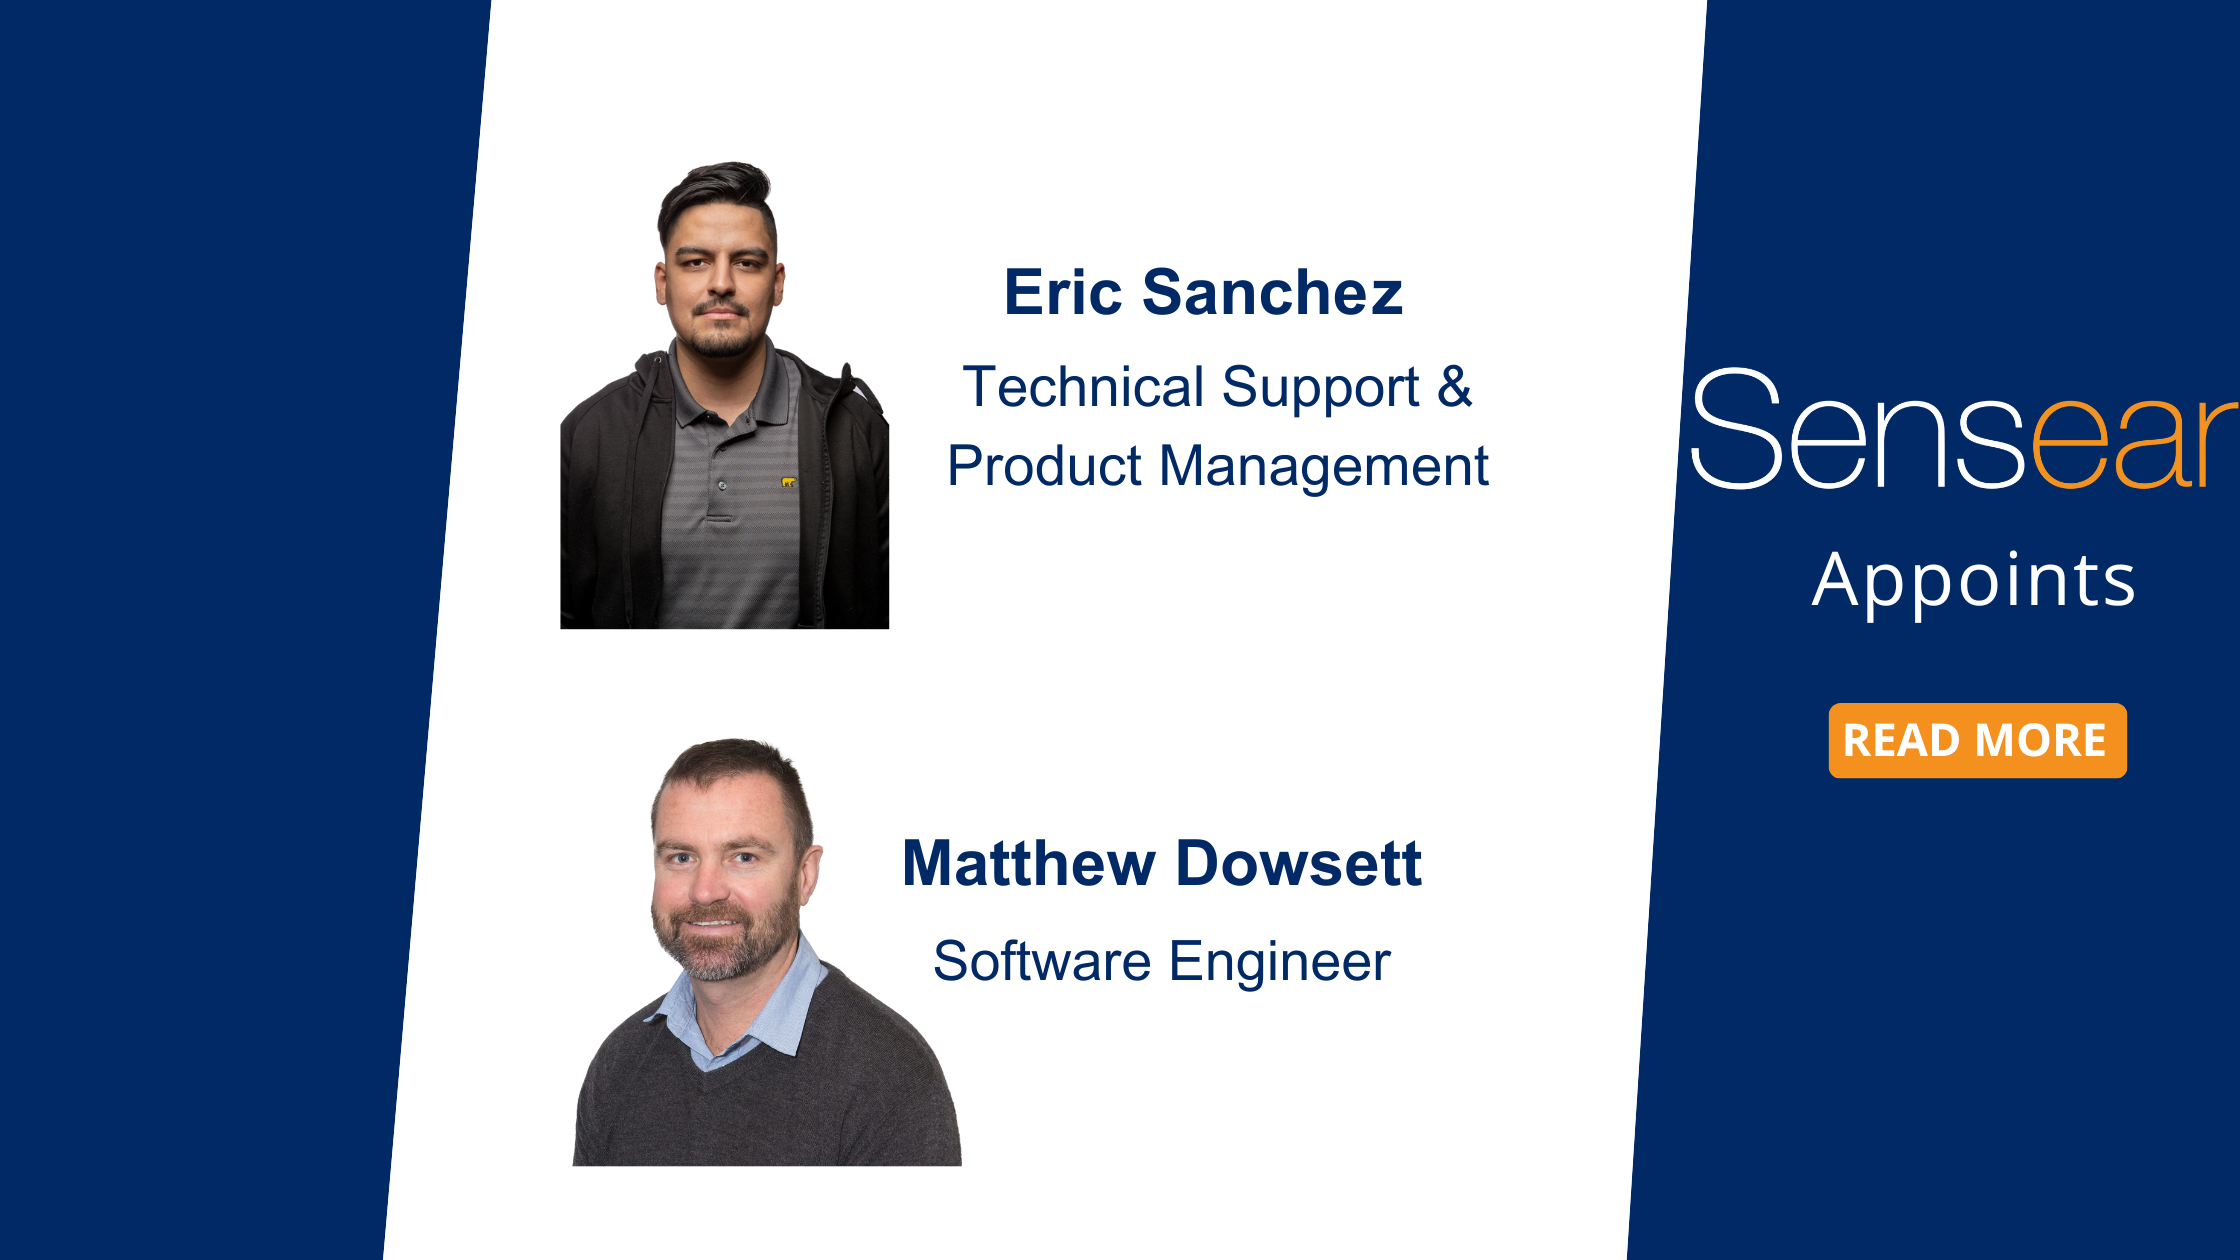 Sensear Appoints New Technical Support/Product Manager and Software Engineer